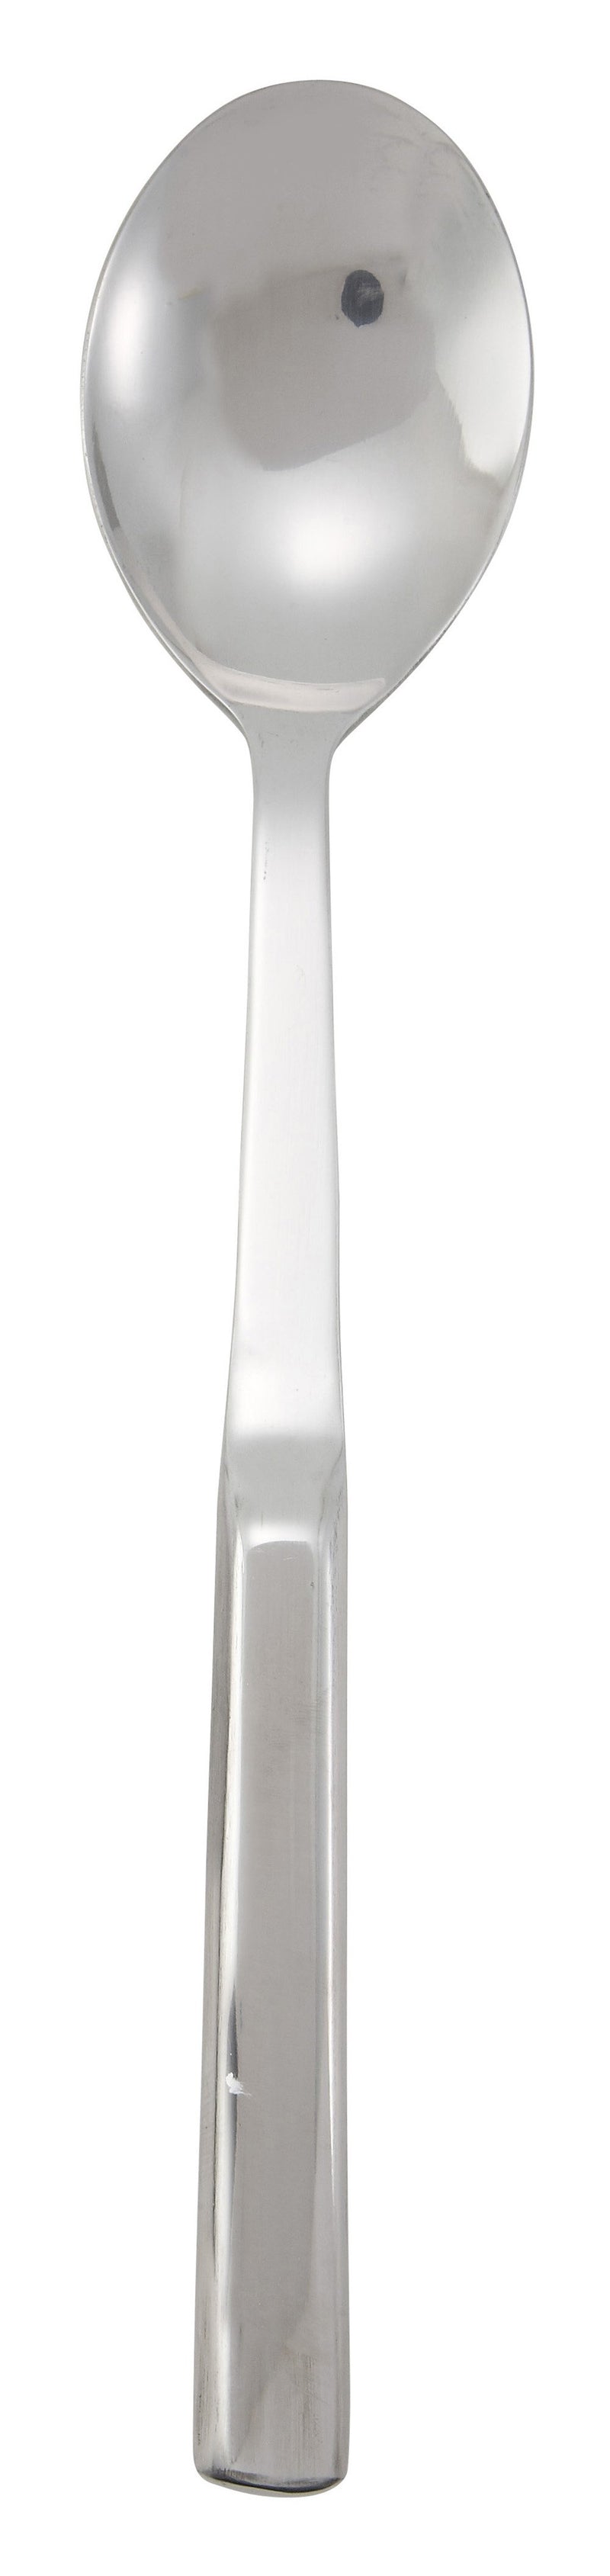 Stainless Steel 11.75" Solid Spoon, Hollow Handle